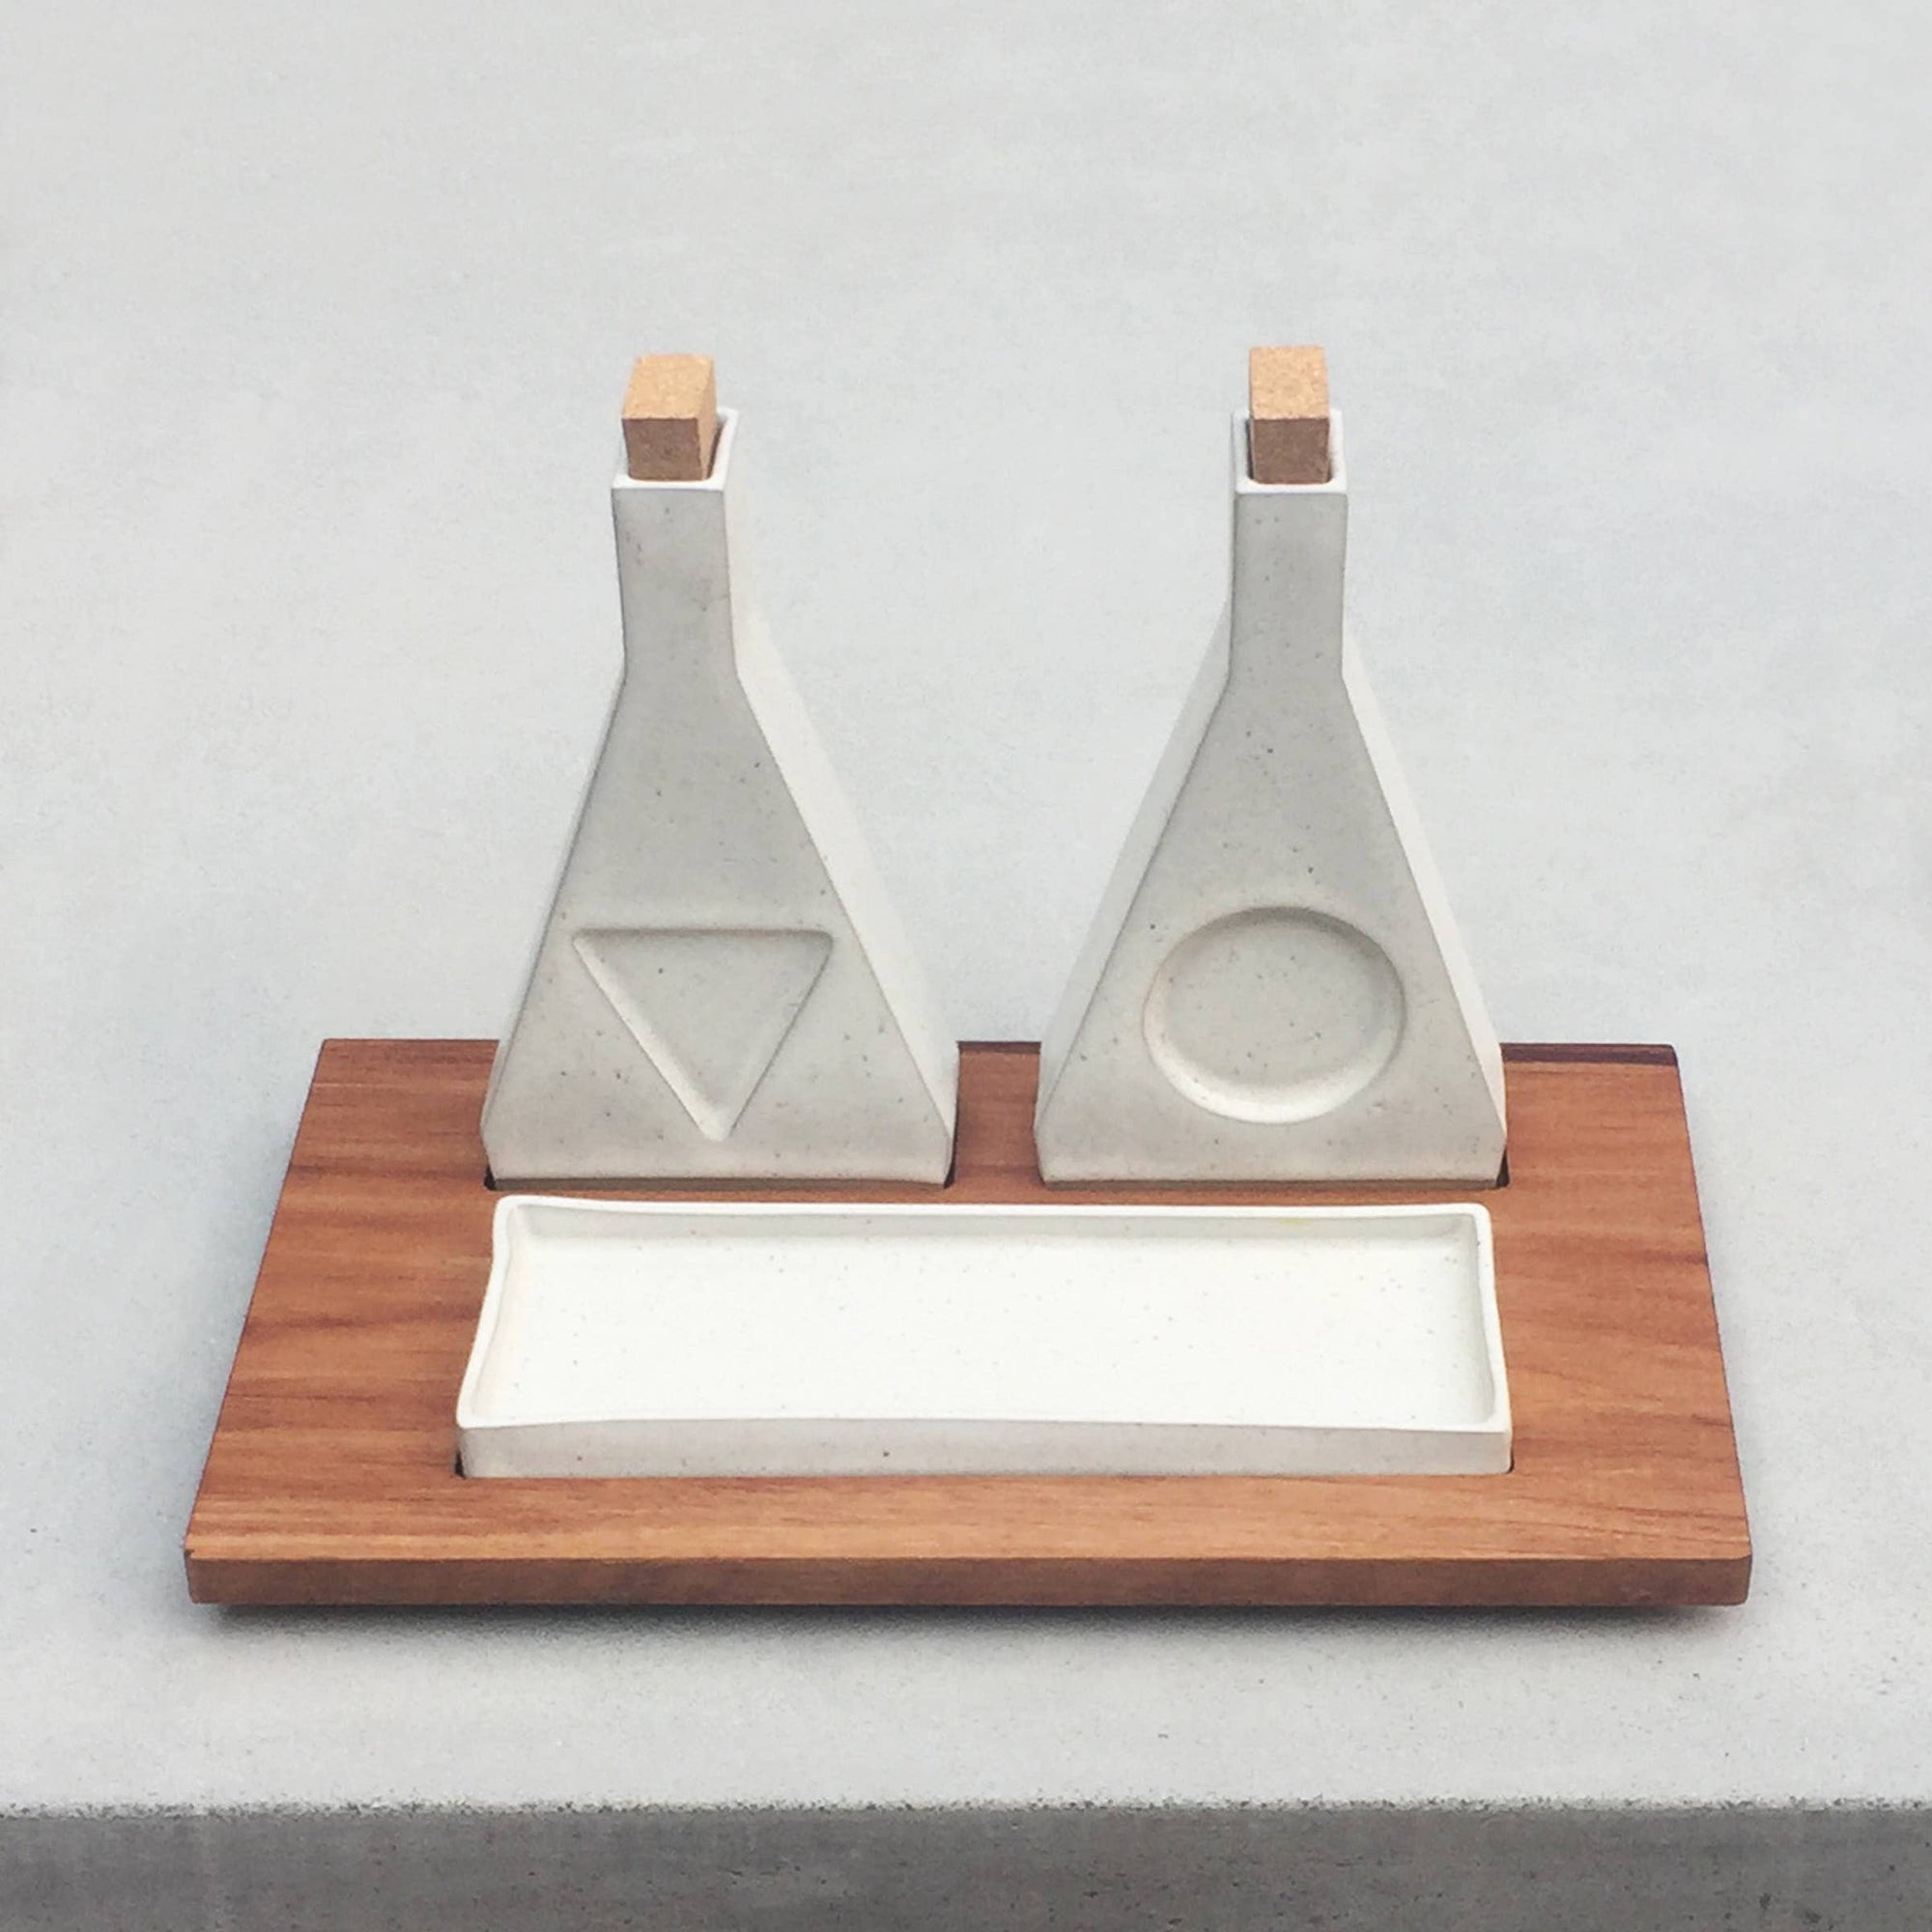 Oil & Vinegar set with Dipping Tray - Pop of Modern